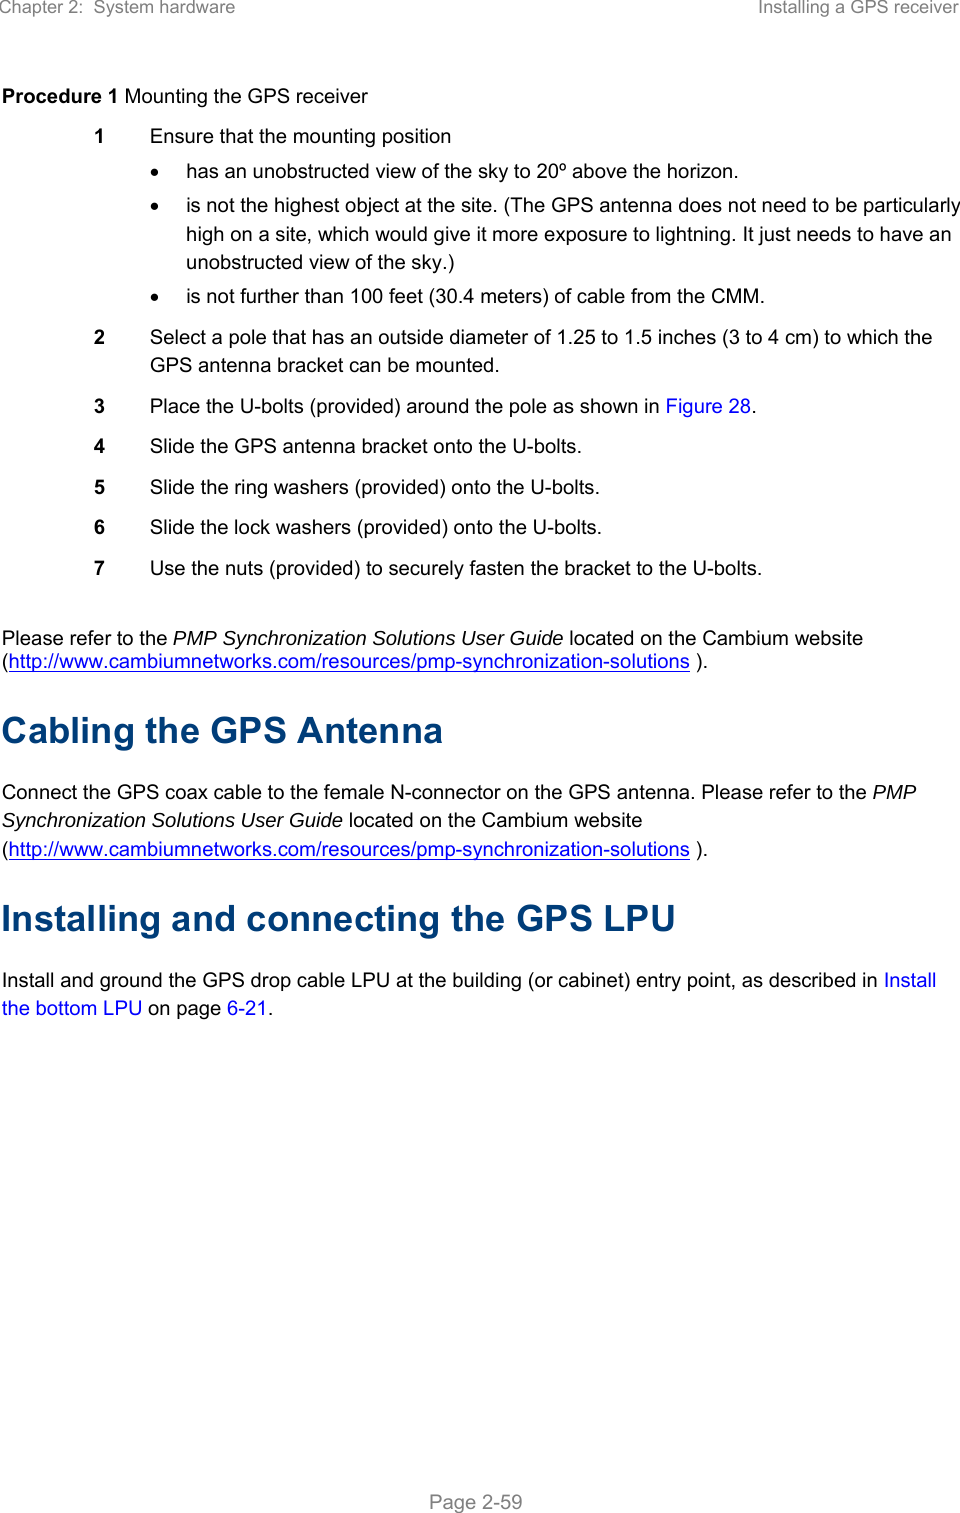 Chapter 2:  System hardware  Installing a GPS receiver   Page 2-59 Procedure 1 Mounting the GPS receiver 1  Ensure that the mounting position   has an unobstructed view of the sky to 20º above the horizon.   is not the highest object at the site. (The GPS antenna does not need to be particularly high on a site, which would give it more exposure to lightning. It just needs to have an unobstructed view of the sky.)   is not further than 100 feet (30.4 meters) of cable from the CMM. 2  Select a pole that has an outside diameter of 1.25 to 1.5 inches (3 to 4 cm) to which the GPS antenna bracket can be mounted. 3  Place the U-bolts (provided) around the pole as shown in Figure 28. 4  Slide the GPS antenna bracket onto the U-bolts. 5  Slide the ring washers (provided) onto the U-bolts. 6  Slide the lock washers (provided) onto the U-bolts. 7  Use the nuts (provided) to securely fasten the bracket to the U-bolts.  Please refer to the PMP Synchronization Solutions User Guide located on the Cambium website (http://www.cambiumnetworks.com/resources/pmp-synchronization-solutions ). Cabling the GPS Antenna Connect the GPS coax cable to the female N-connector on the GPS antenna. Please refer to the PMP Synchronization Solutions User Guide located on the Cambium website (http://www.cambiumnetworks.com/resources/pmp-synchronization-solutions ). Installing and connecting the GPS LPU Install and ground the GPS drop cable LPU at the building (or cabinet) entry point, as described in Install the bottom LPU on page 6-21.  